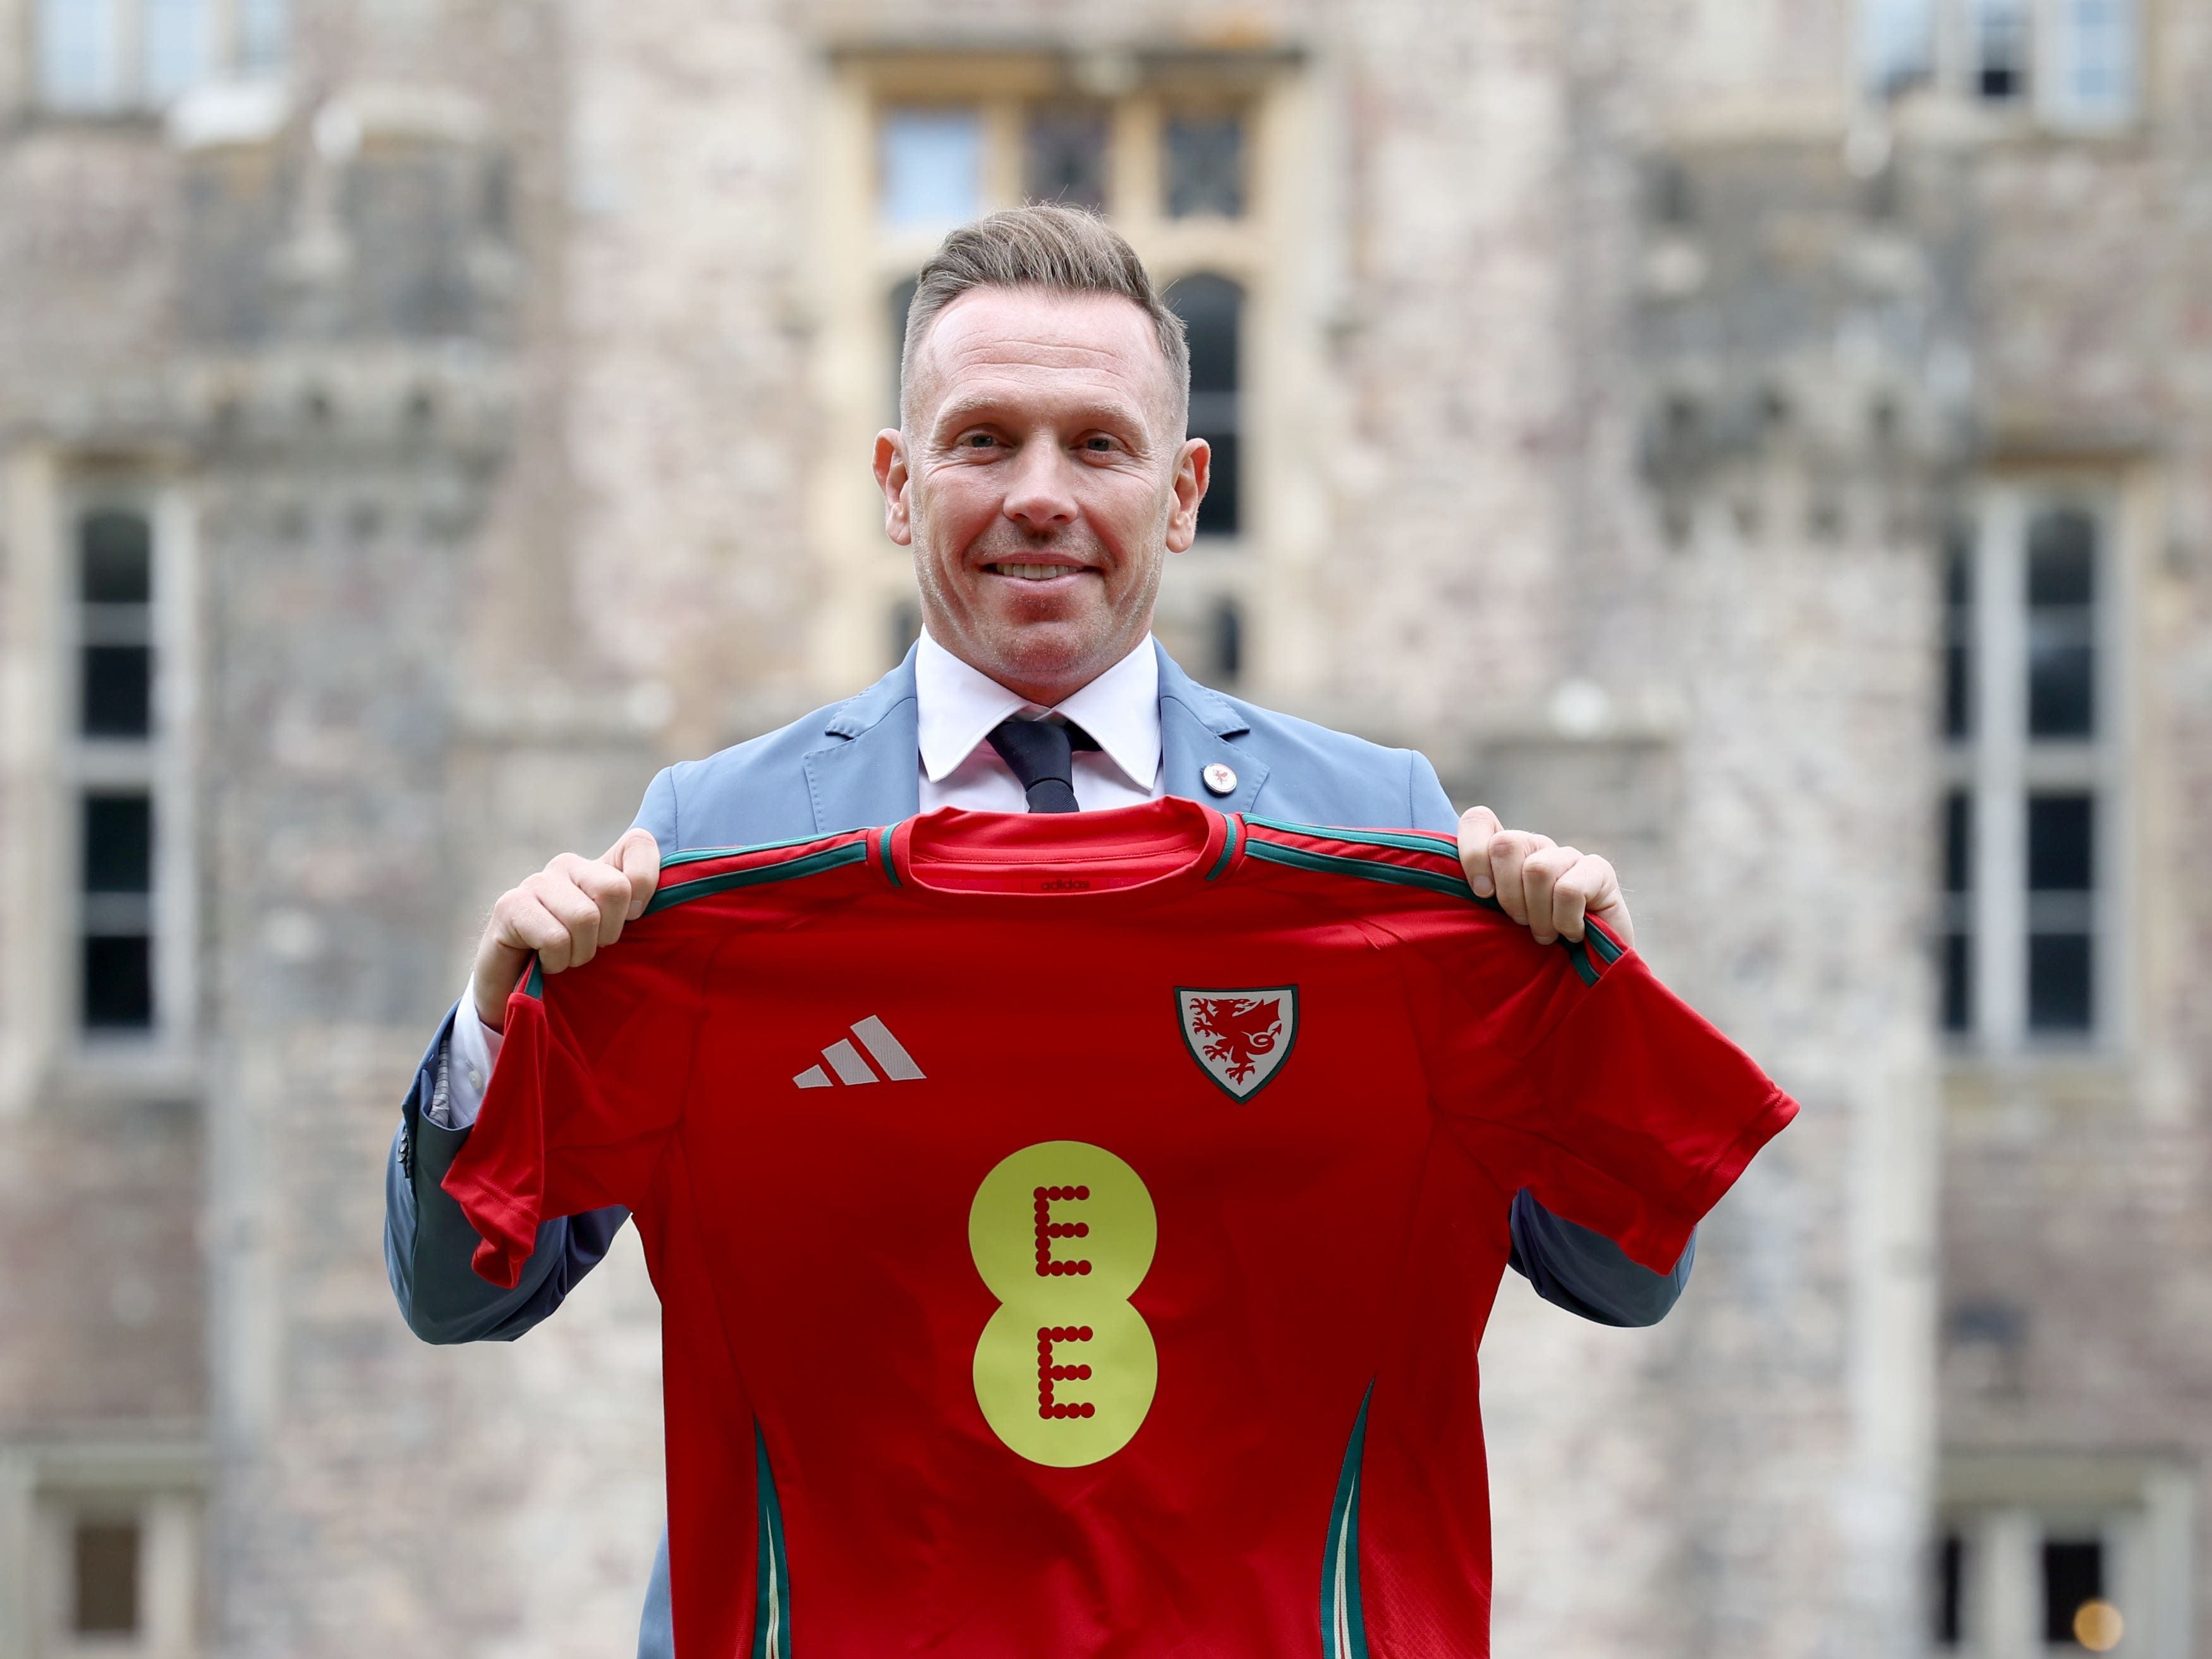 New Wales boss Craig Bellamy out to prove concerns over temperament unfounded